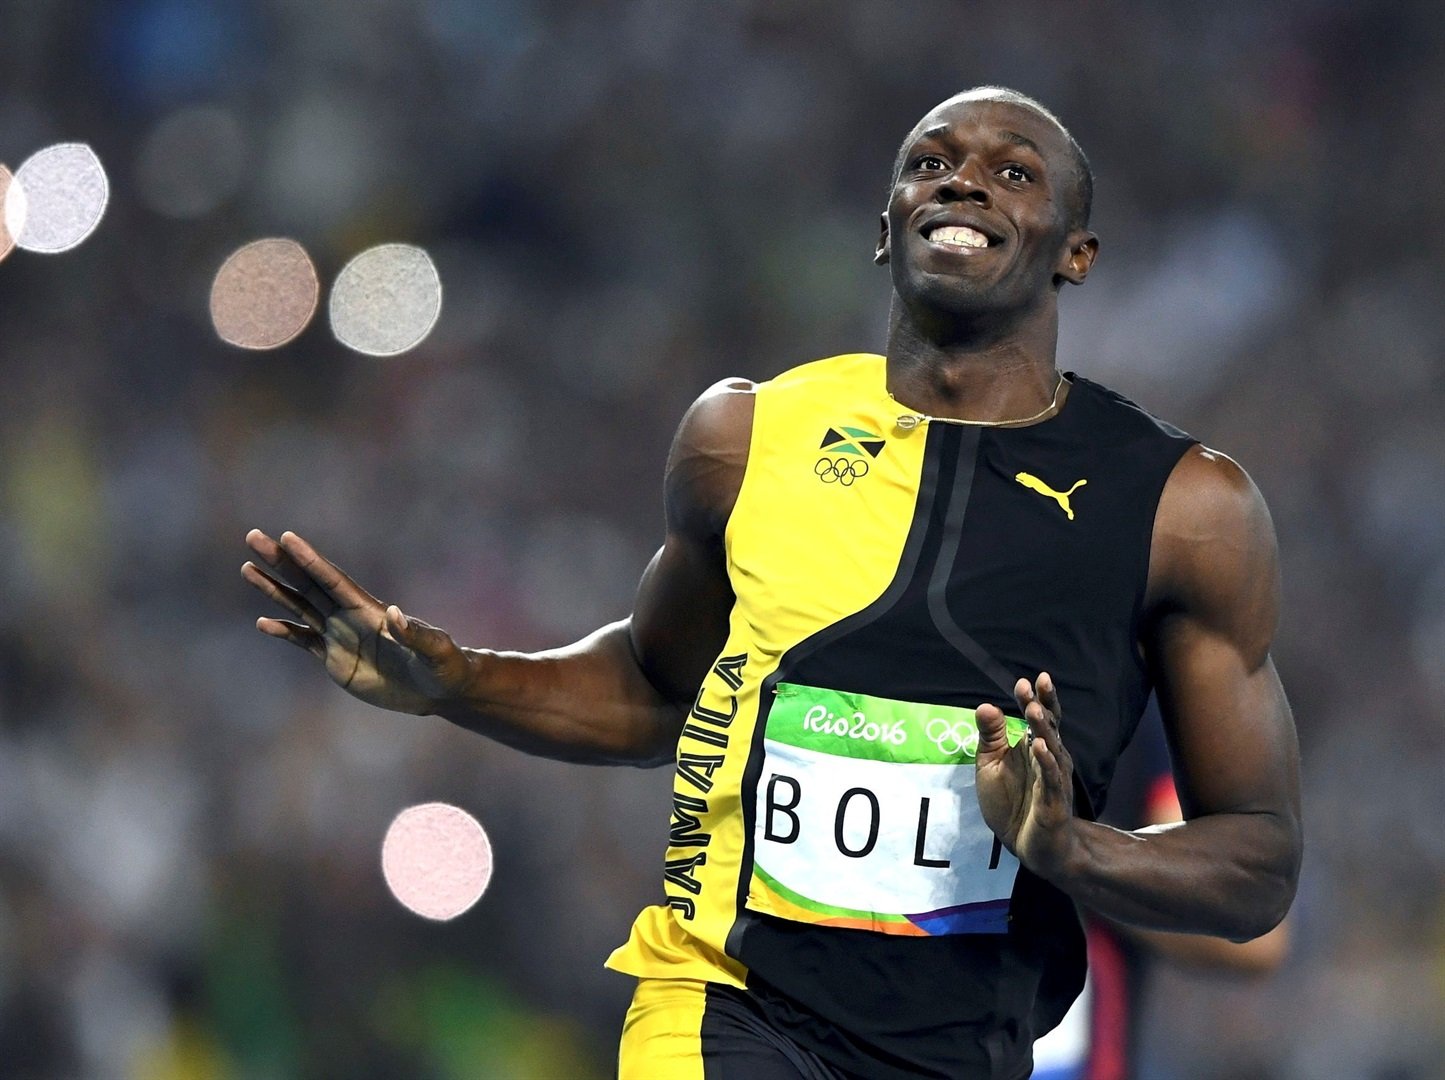 The 8-time Olympic gold medalist Usain Bolt has a mysterious $12.7 million hole in an investment account with Stocks & Securities Limited. Photo: Reuters/Dylan Martinez